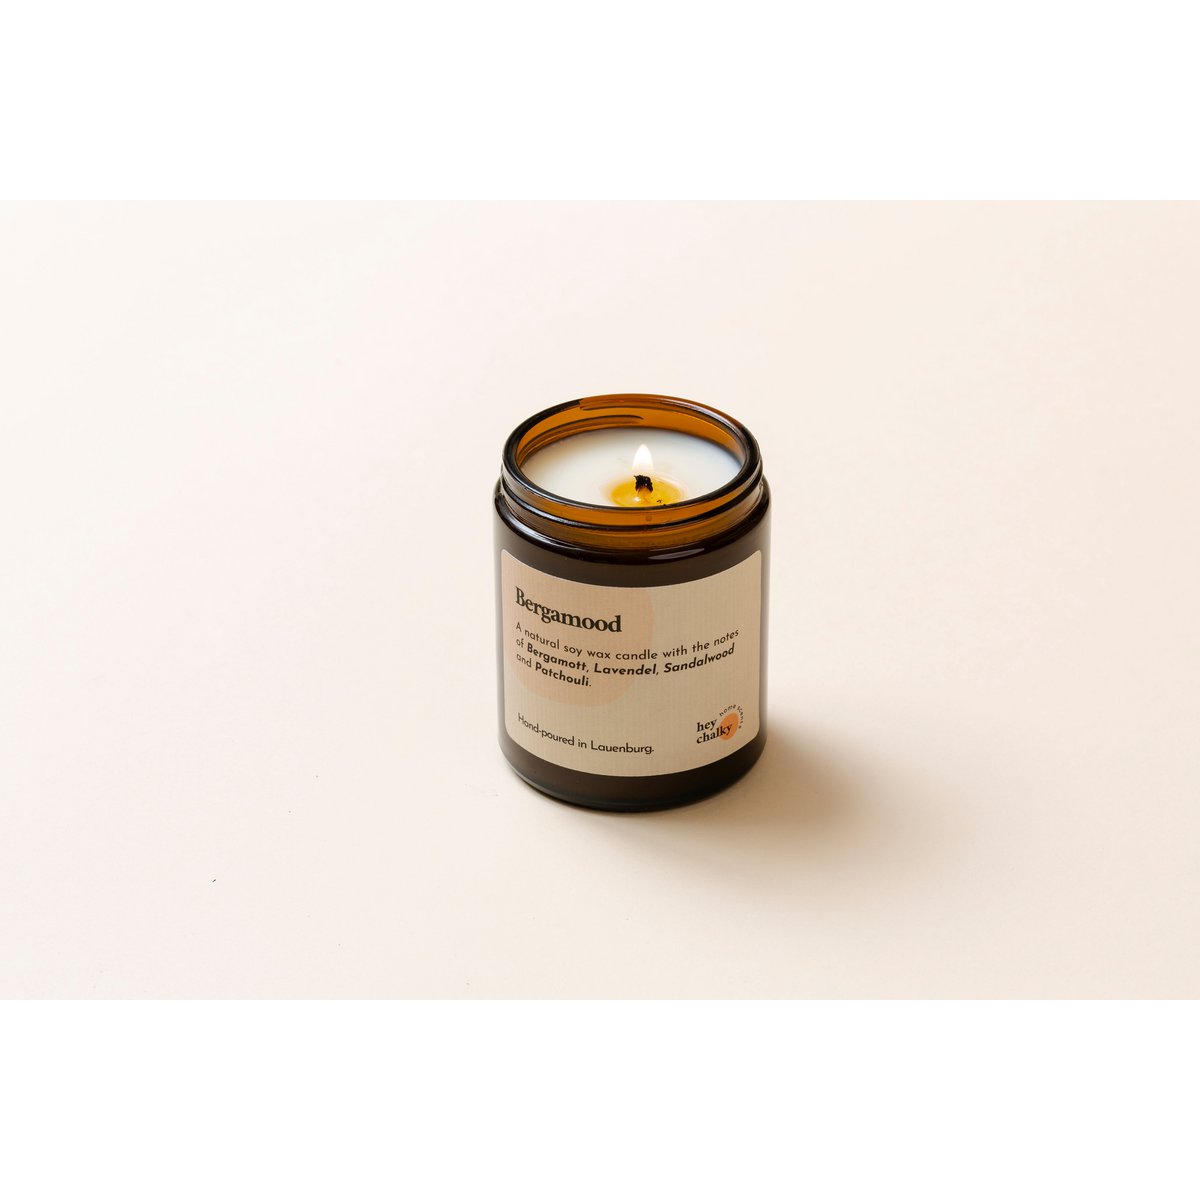 Candle "Bergamood" 155 g - scented candle in a glass